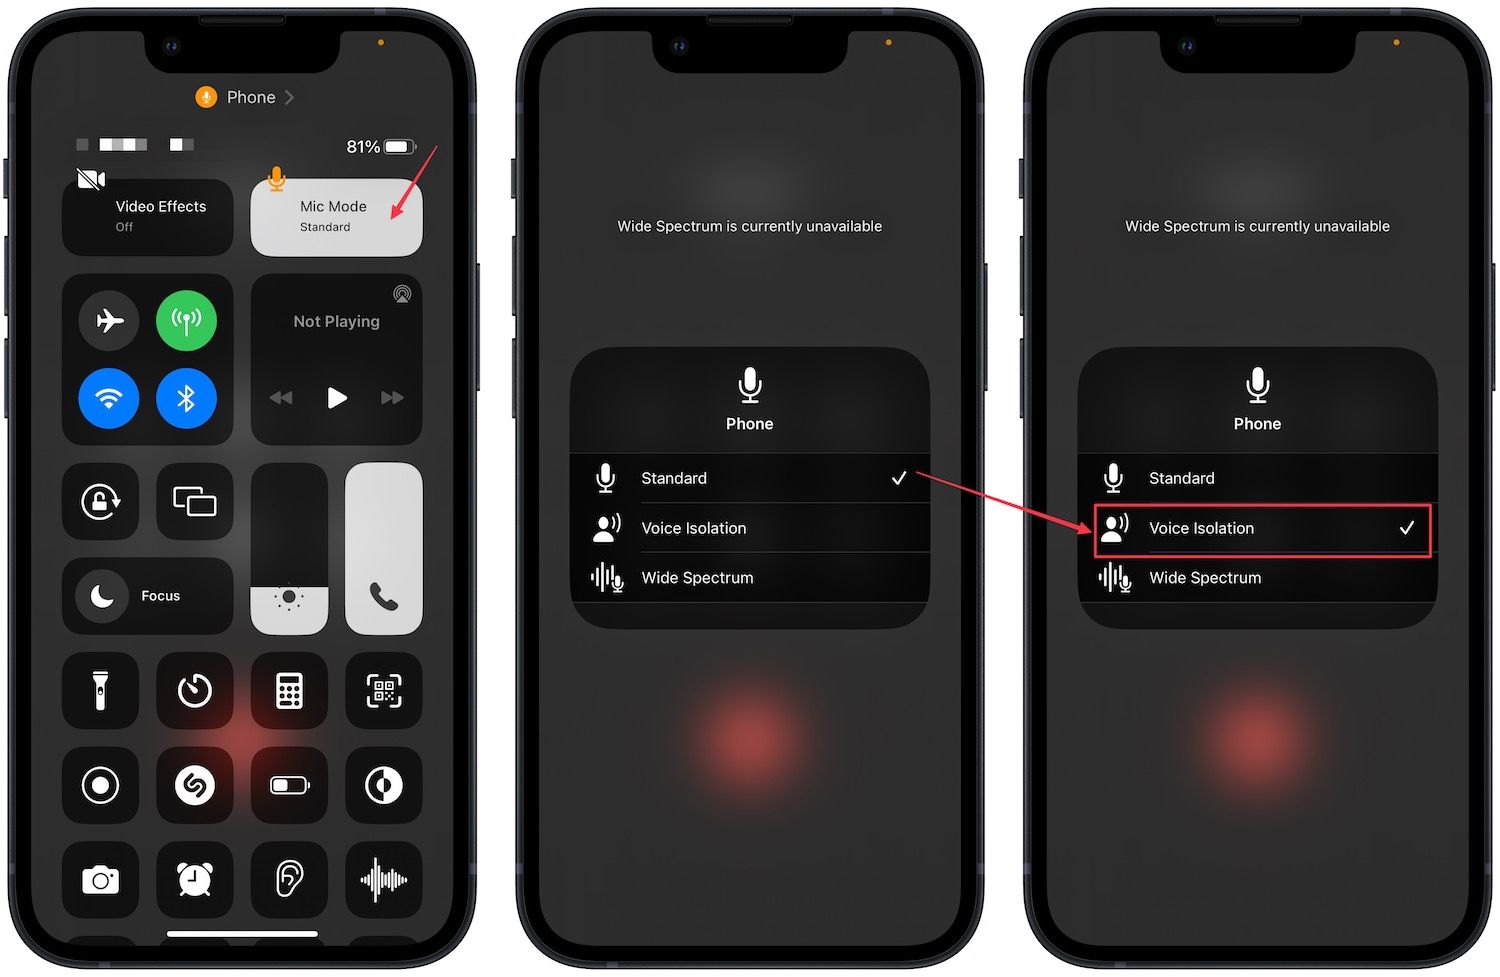 Control center screenshot showing voice isolation feature